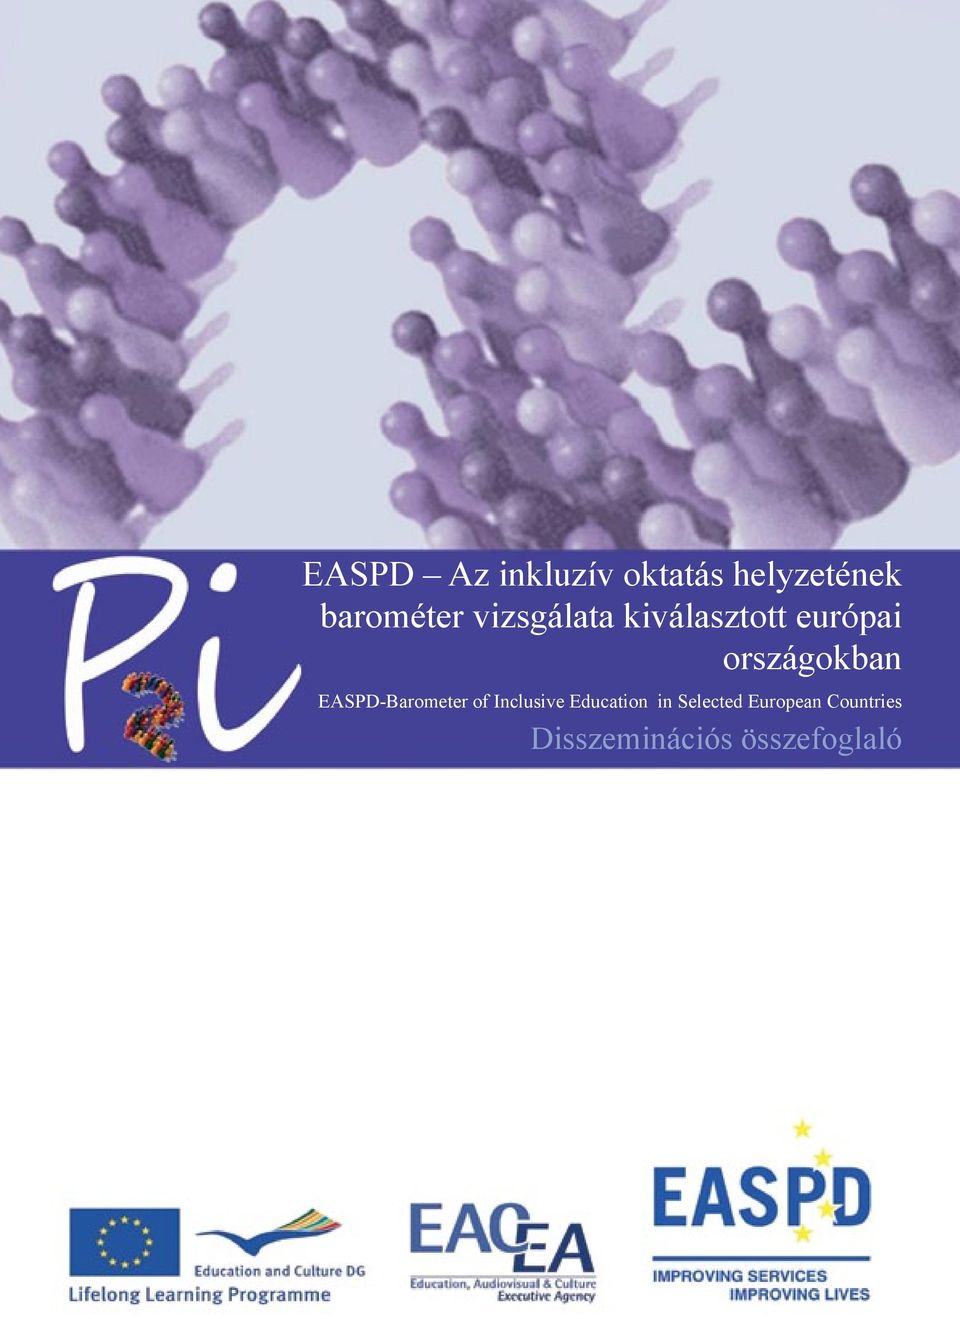 EASPD-Barometer of Inclusive Education in